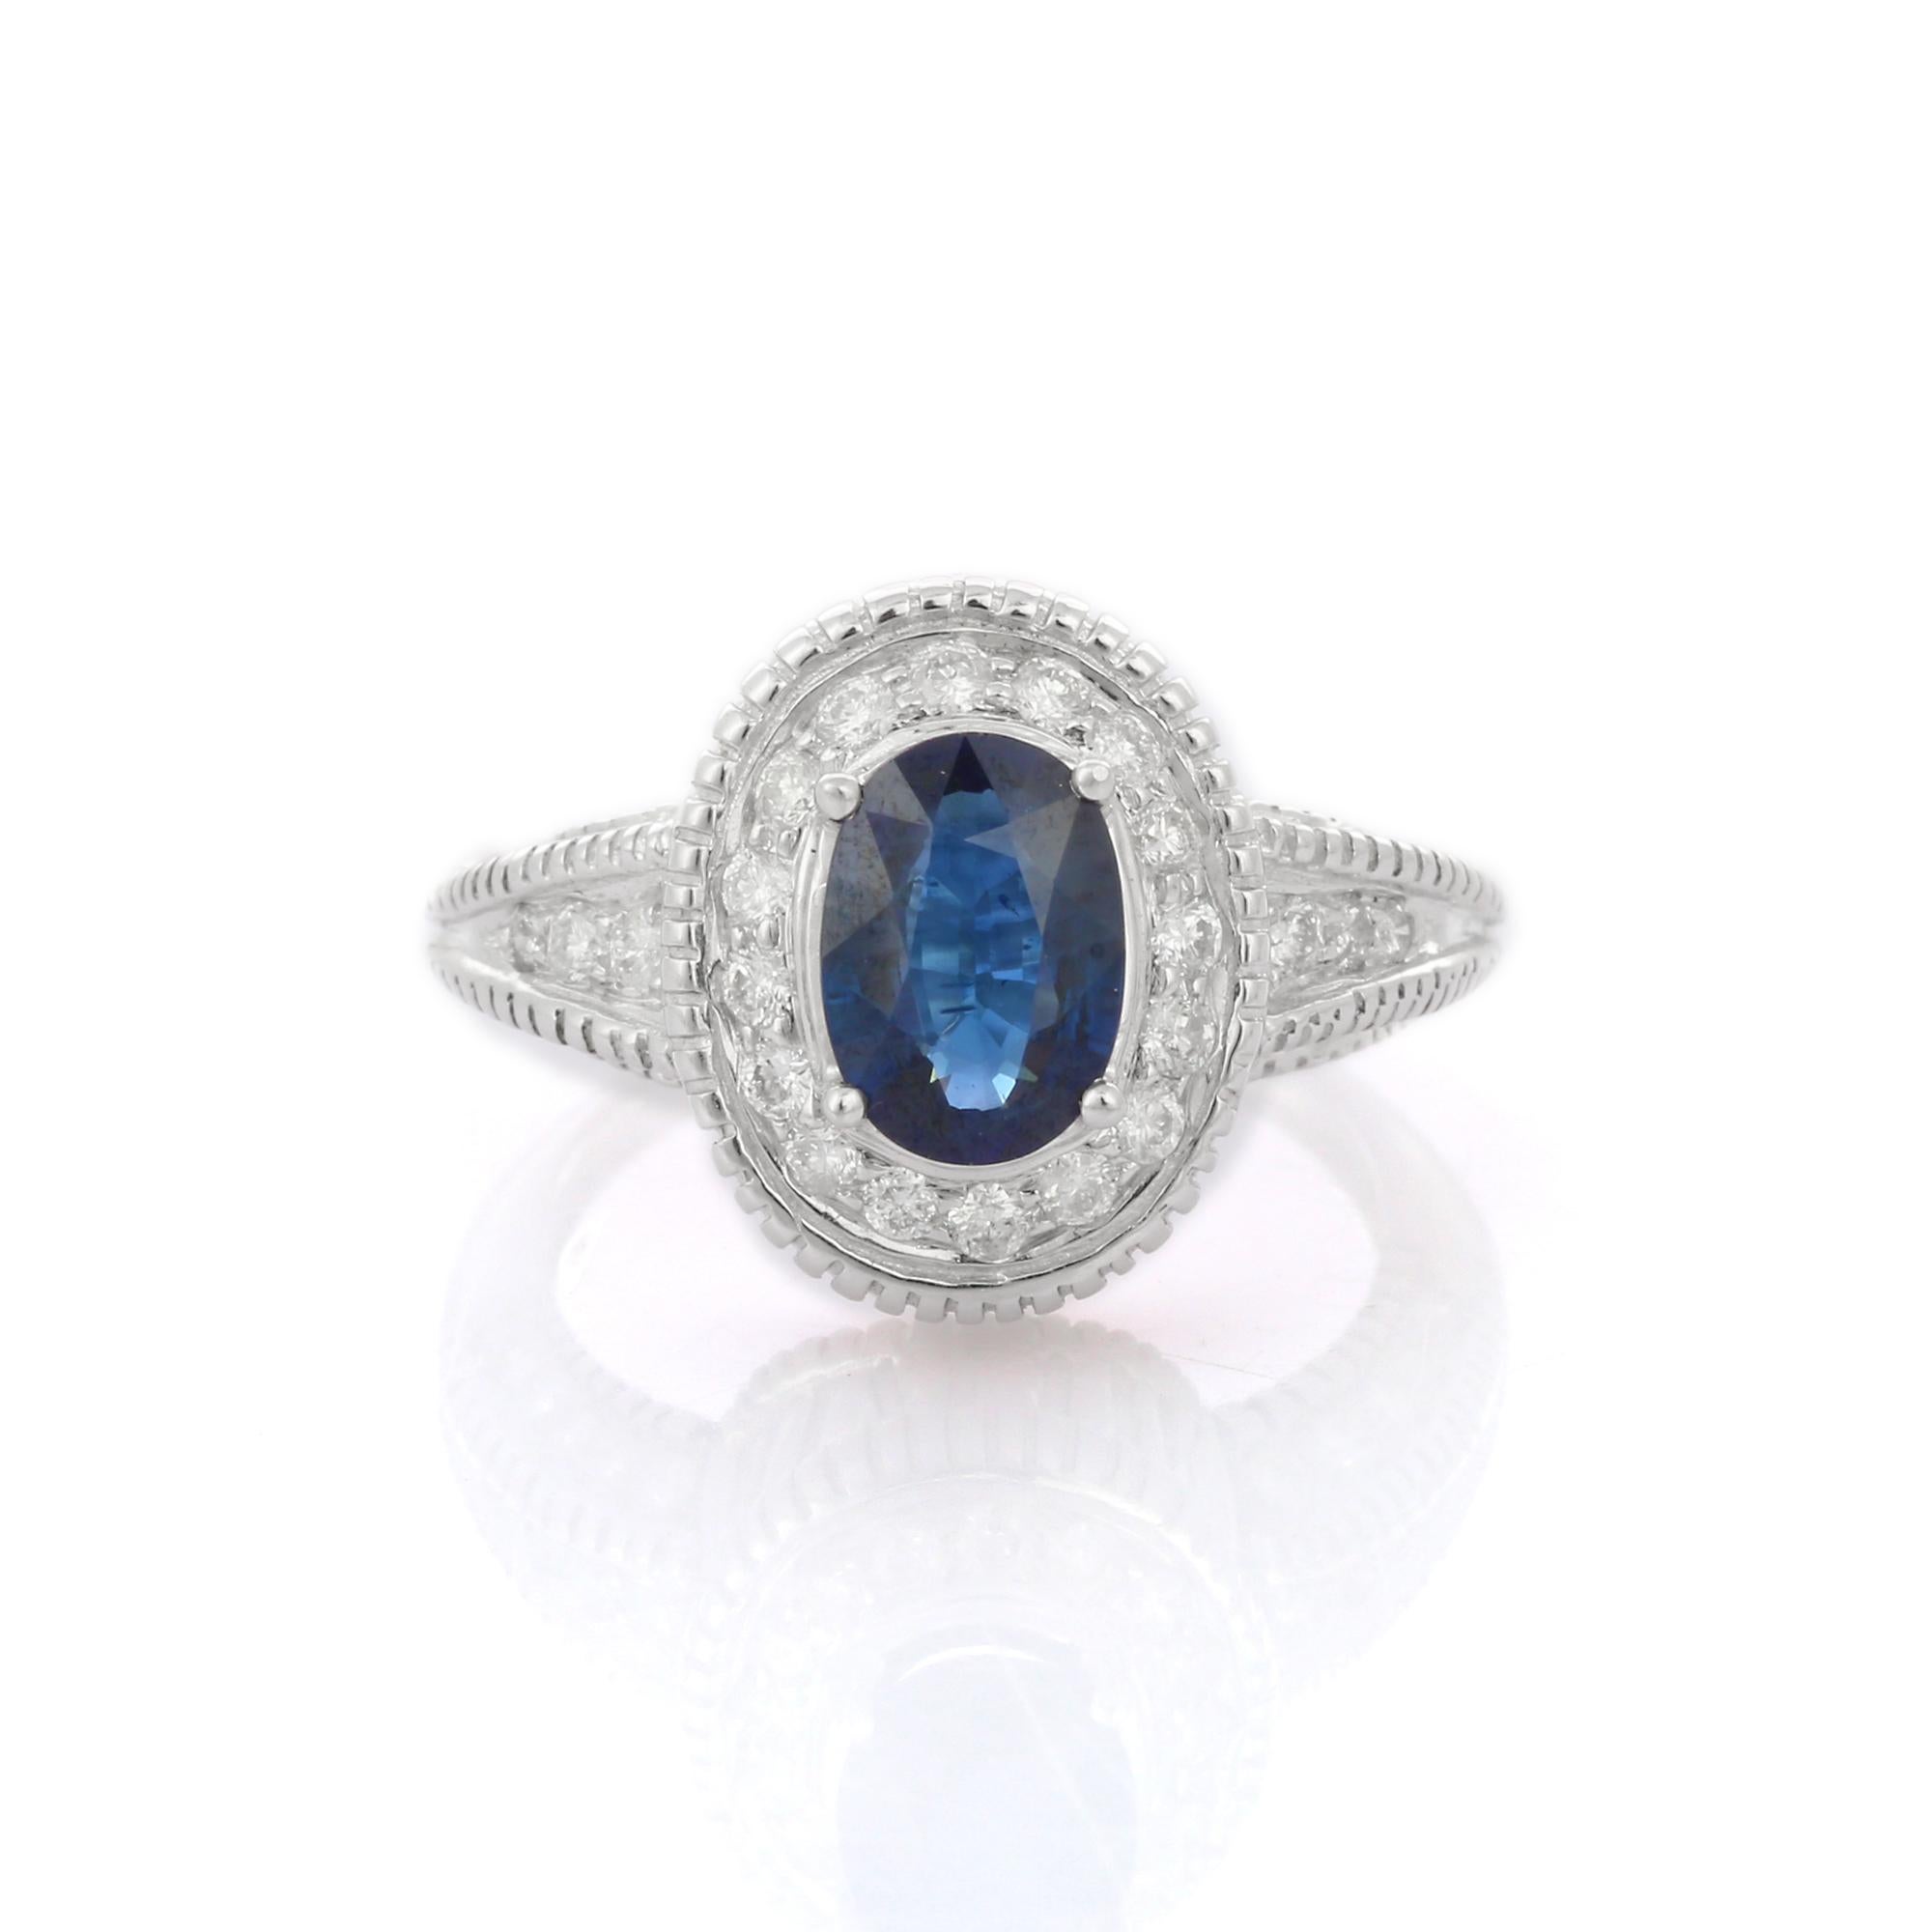 For Sale:  Blue Sapphire Amid Diamonds in 18K Solid White Gold Wedding Ring 2